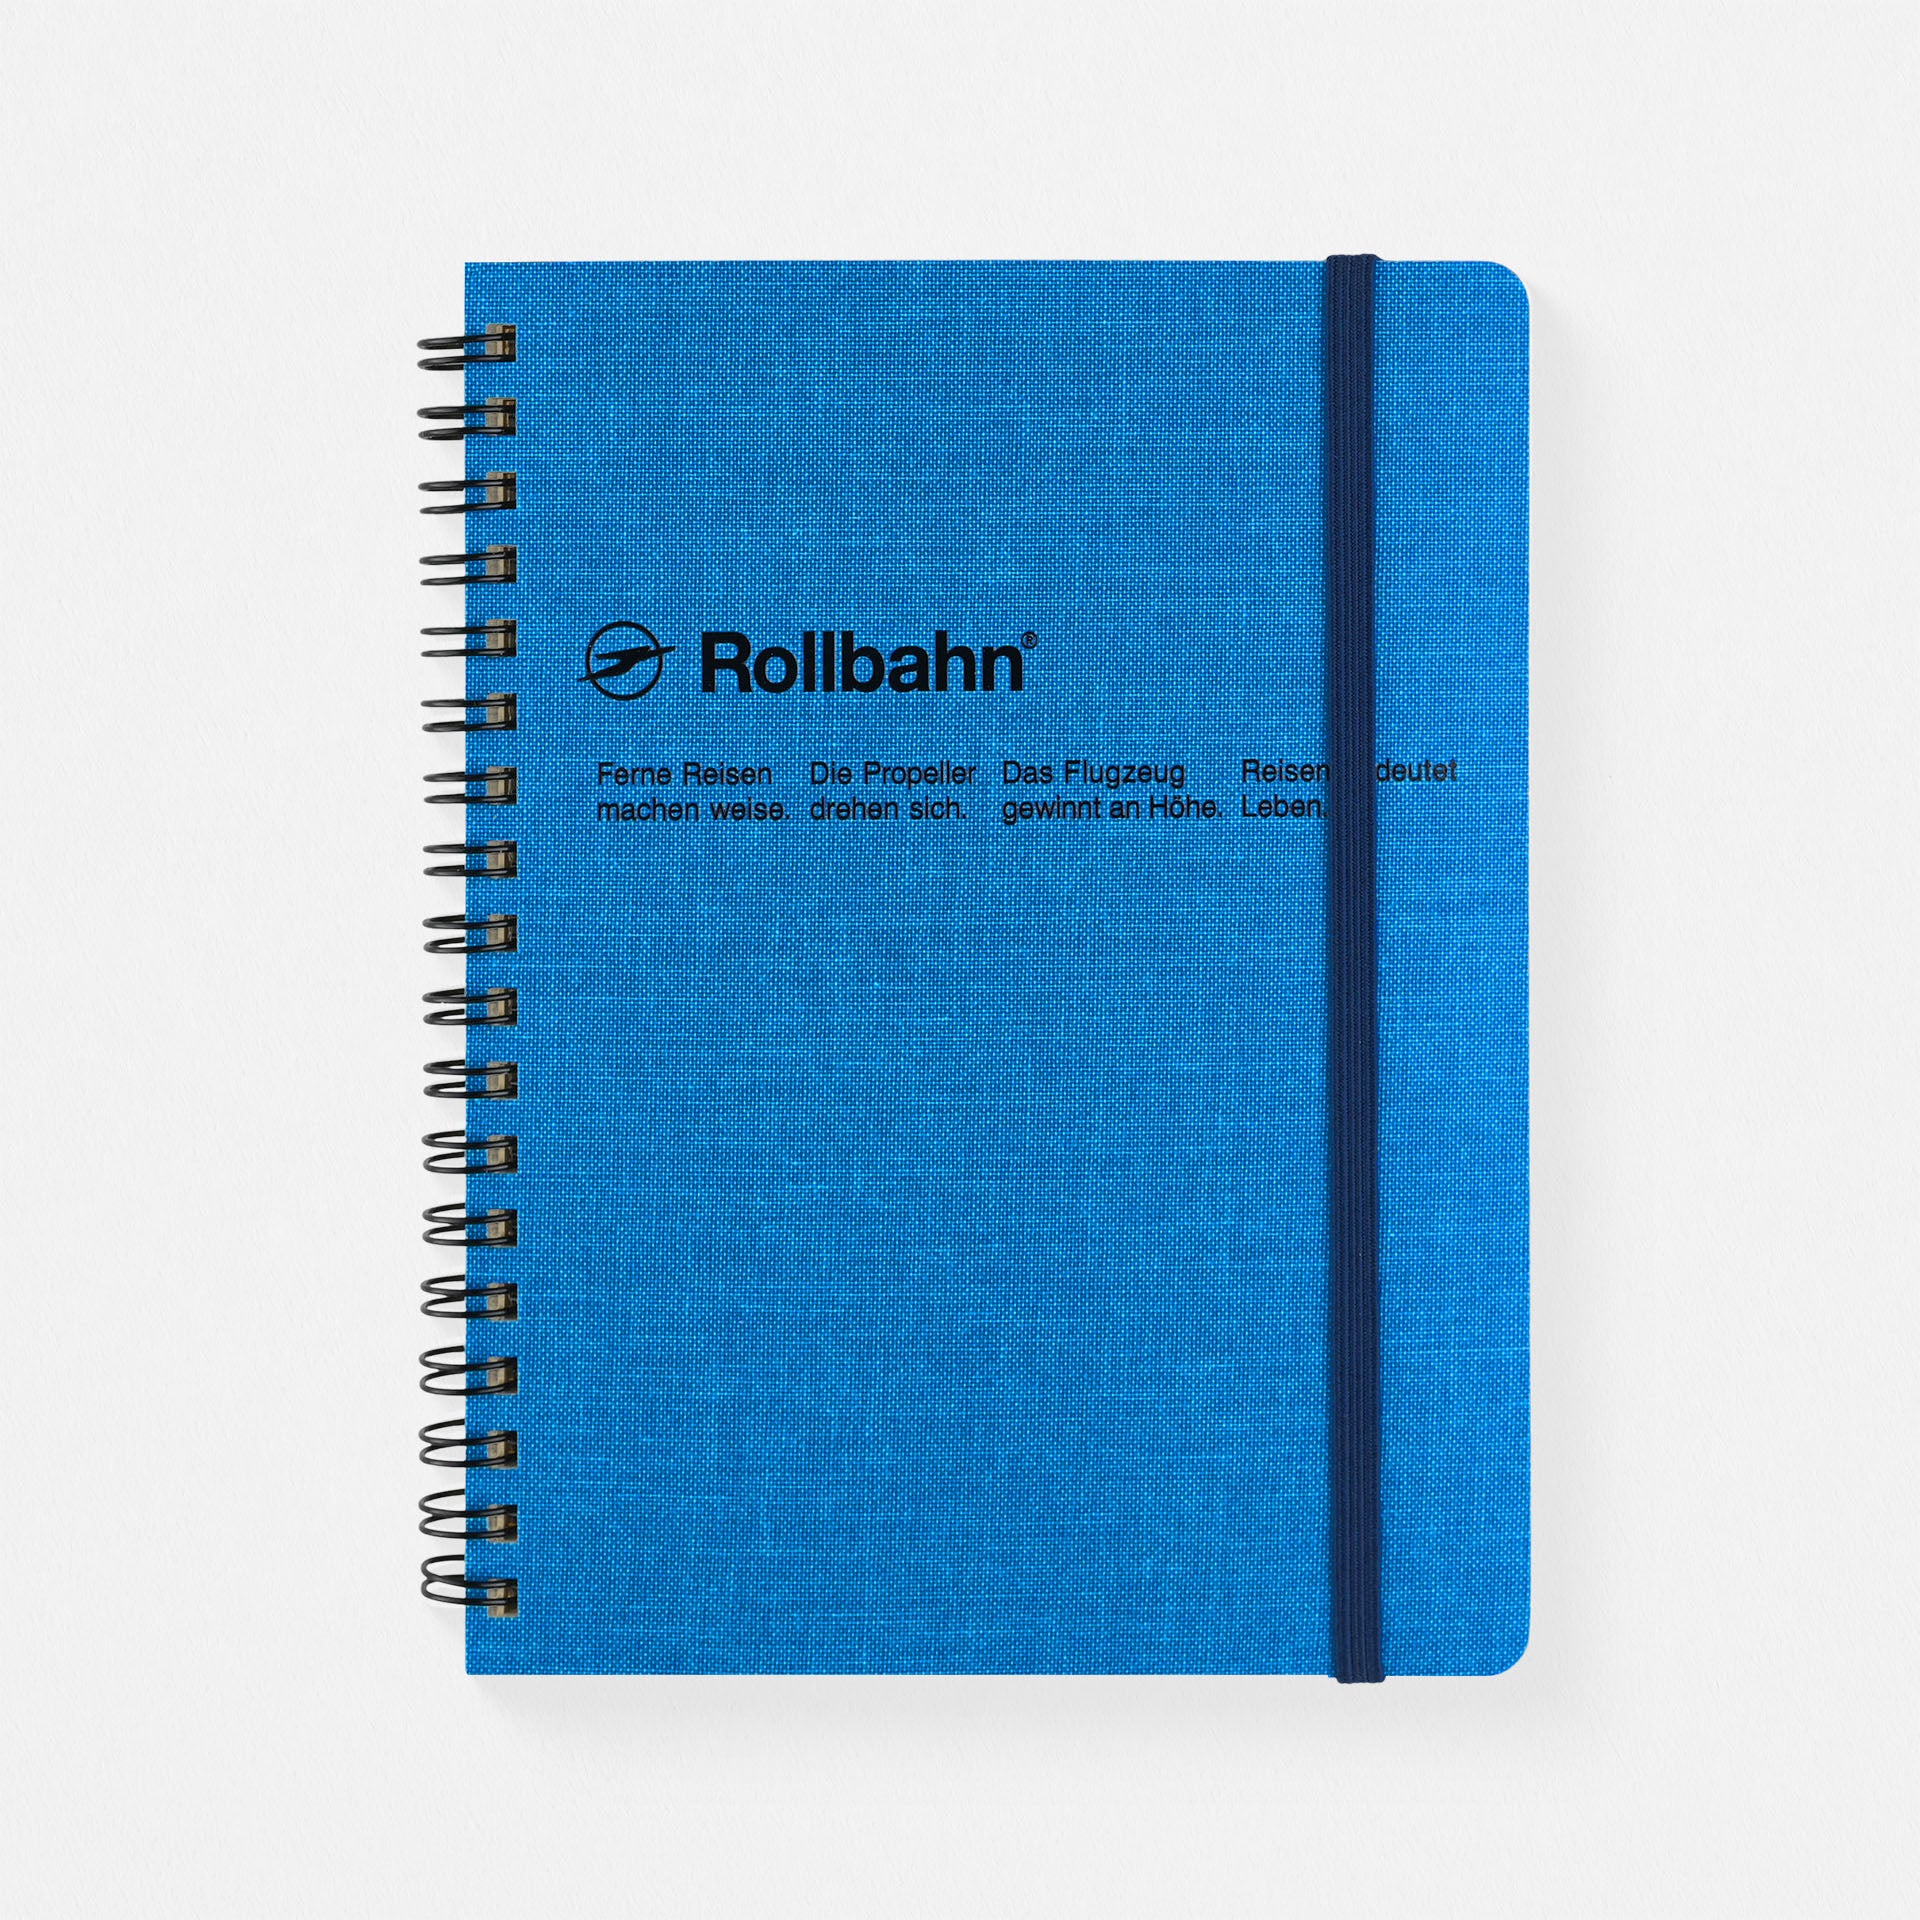 Delfonics Rollbahn Cap-Martin Textured Cover Notebook Large Or A5 | Greige, Green, Dark Blue Or Blue Blue / Large (5.5 x 7")